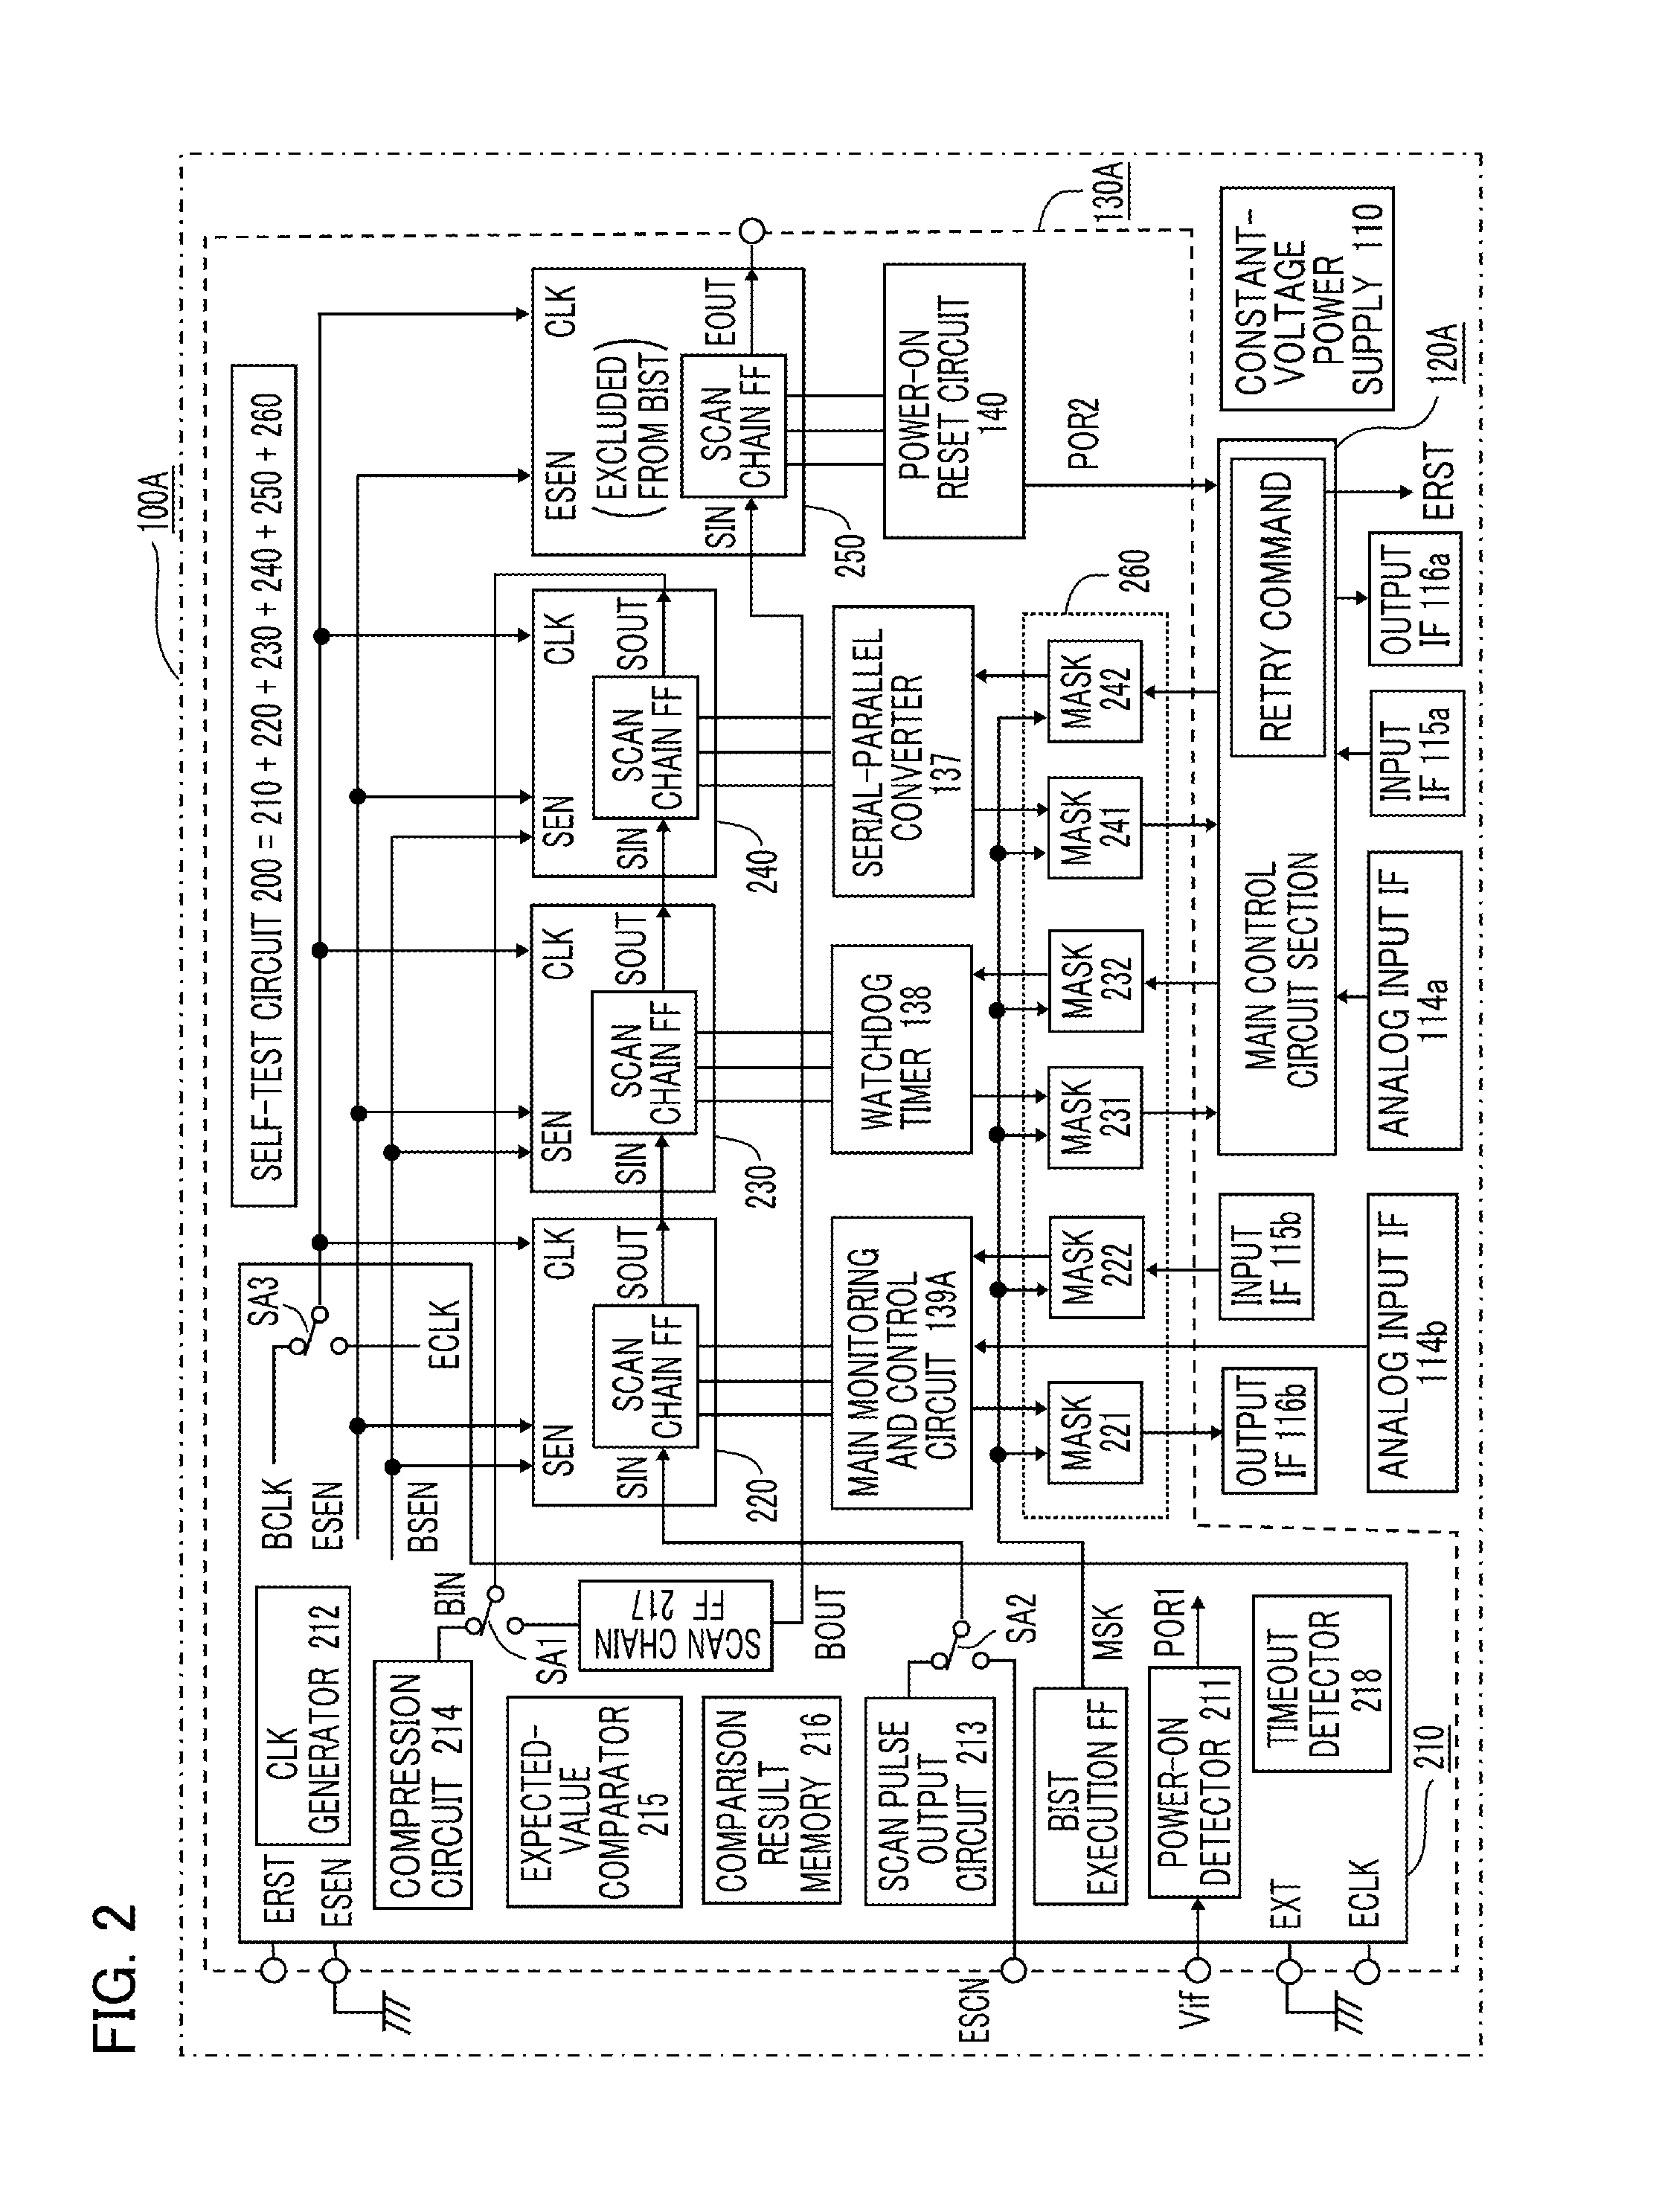 Electronic control unit having integrated circuit element and standalone test unit for integrated circuit element